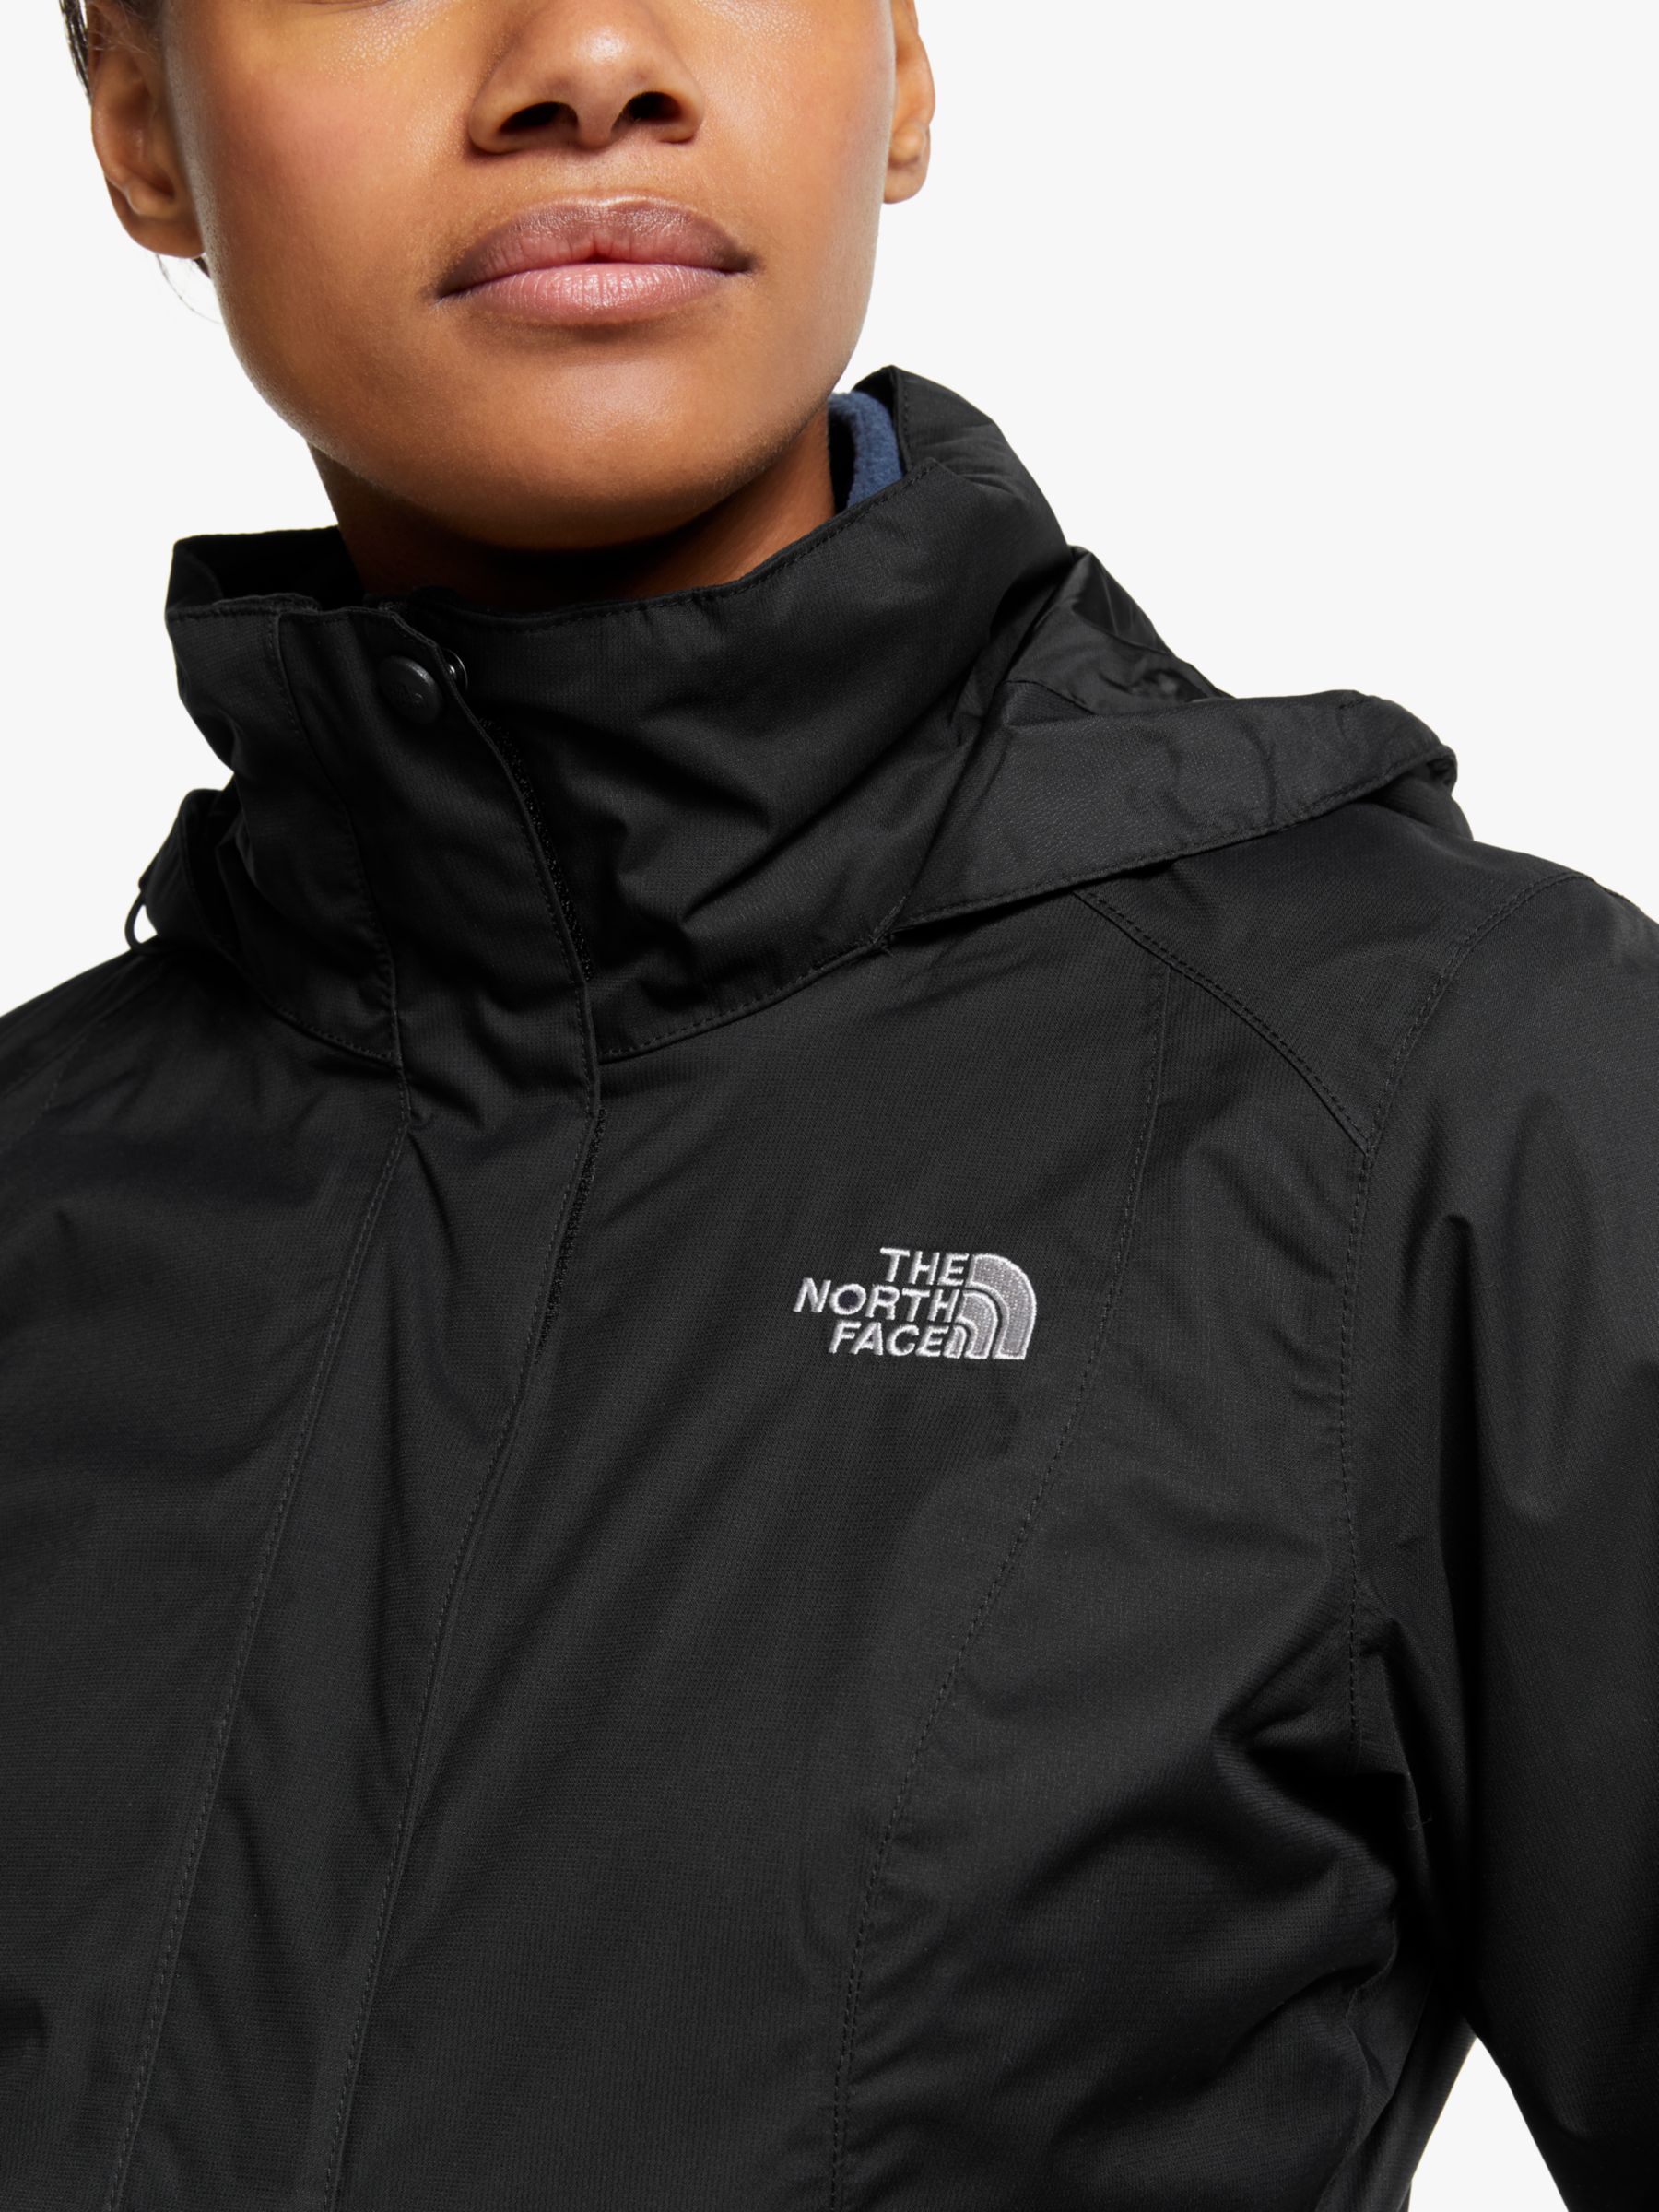 The North Face Evolve II Triclimate 3-in-1 Waterproof Women's